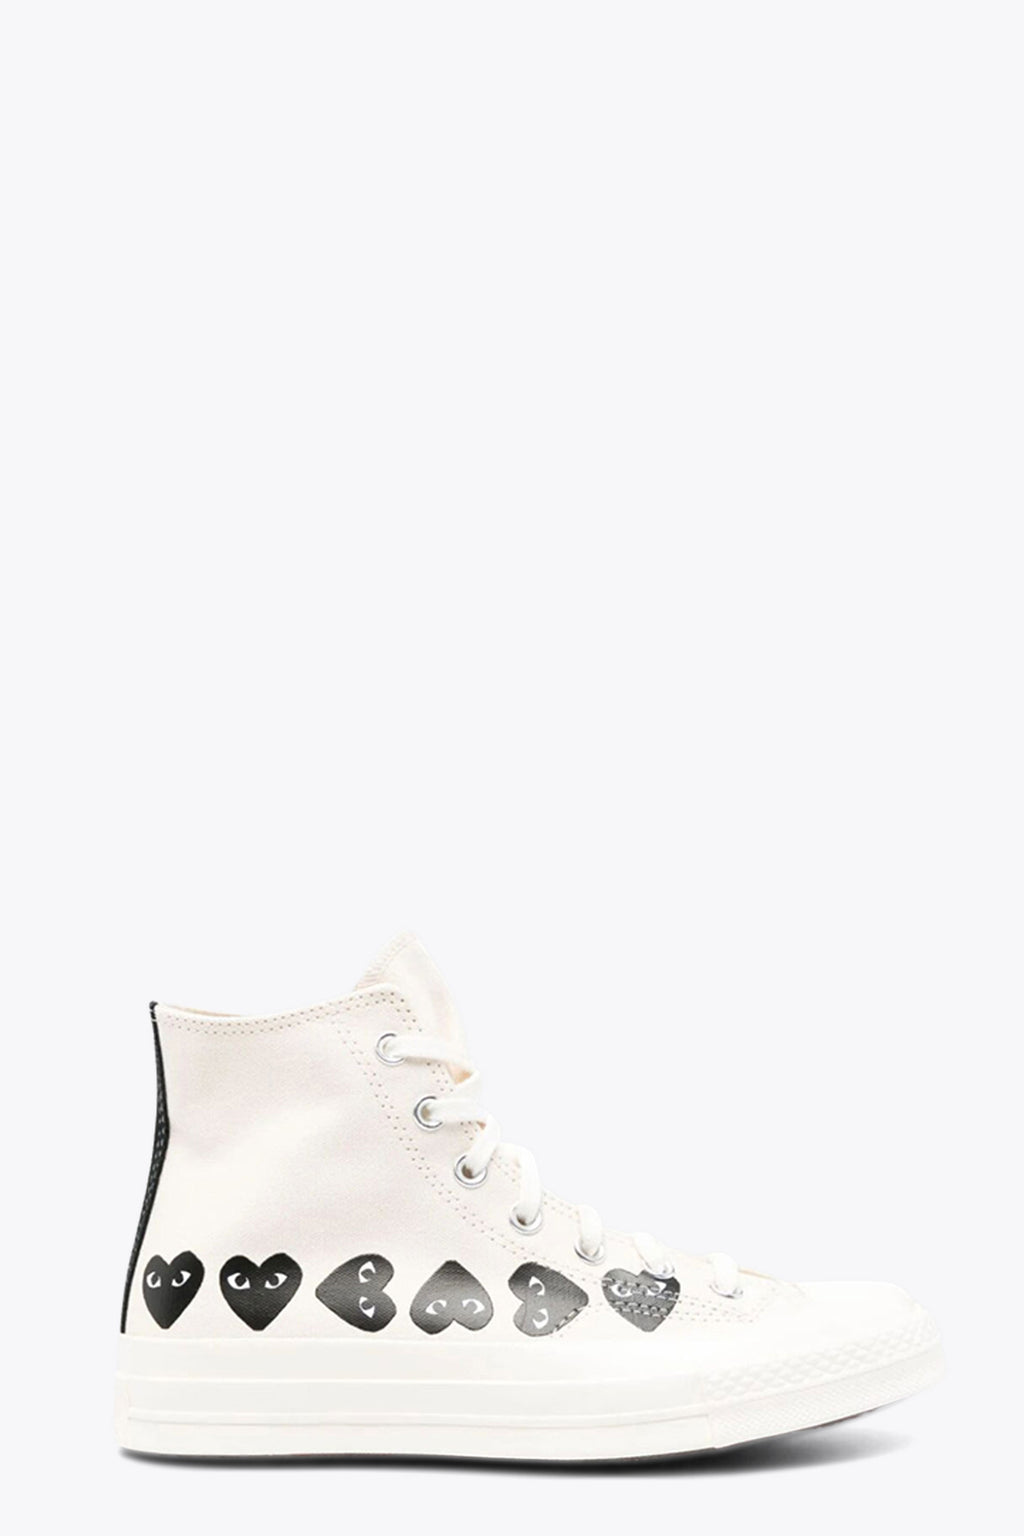 alt-image__Converse-collaboration-Chuck-Taylor-70's-off-white-canvas-high-sneaker